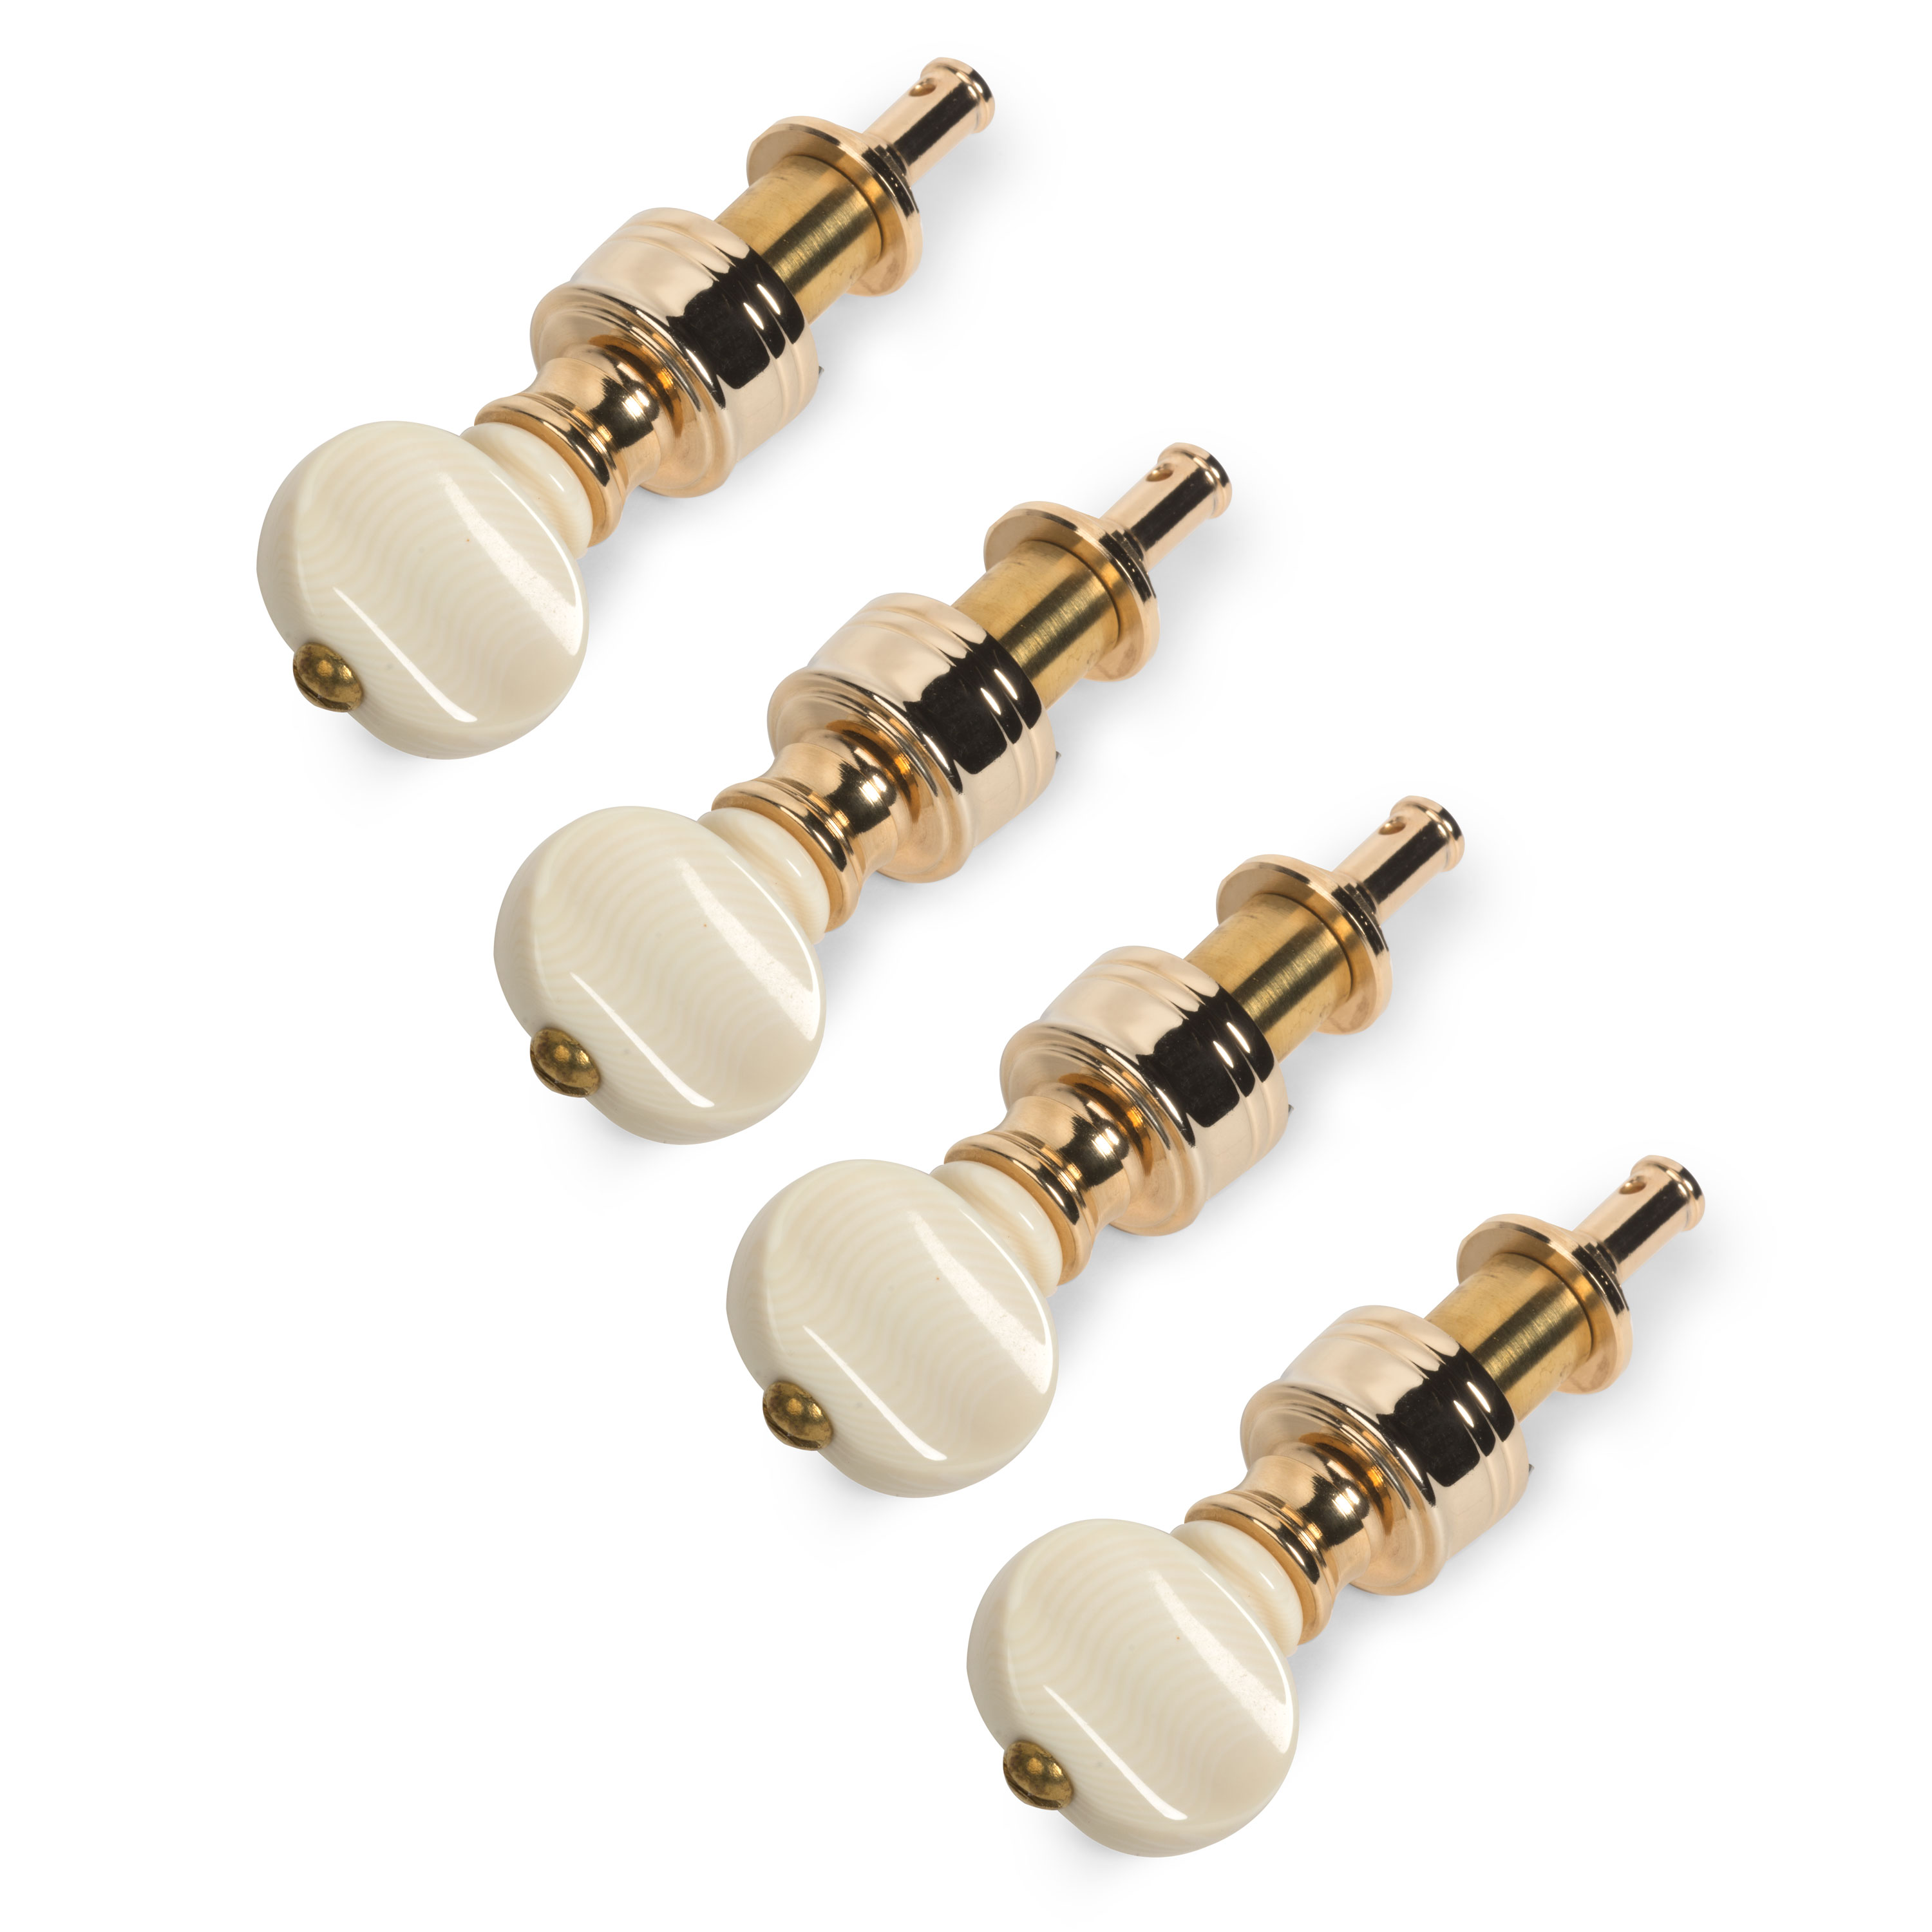 Rickard Cyclone High Ratio Tuning Pegs for Banjo with Ivoroid Knobs, Set of  4, Nickel